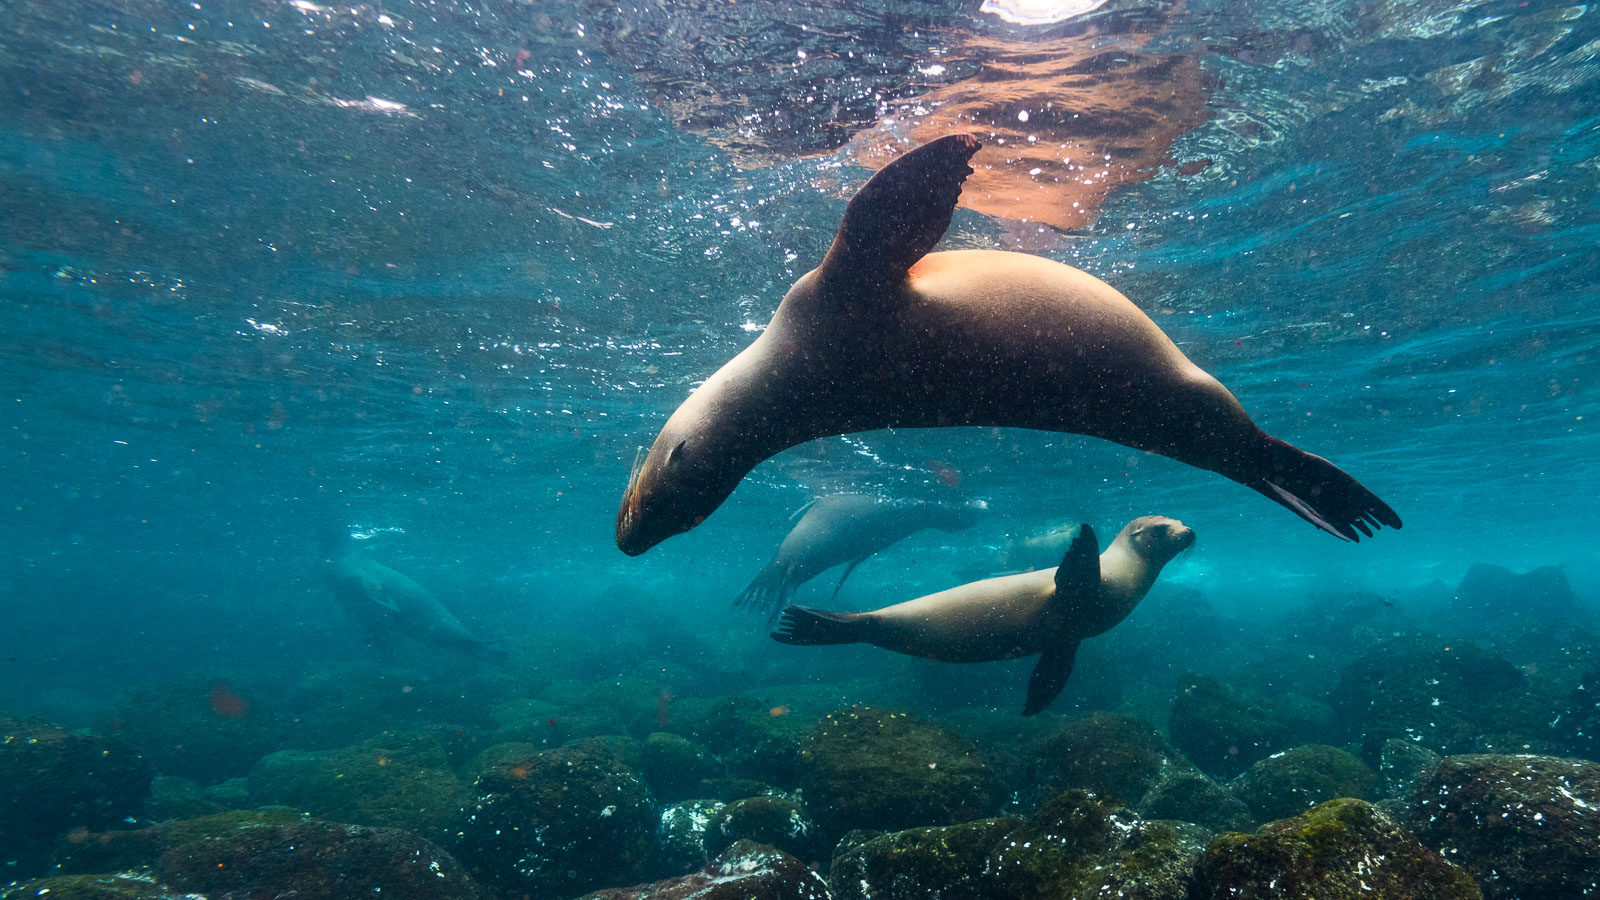 Free guide to diving in the Galapagos Islands